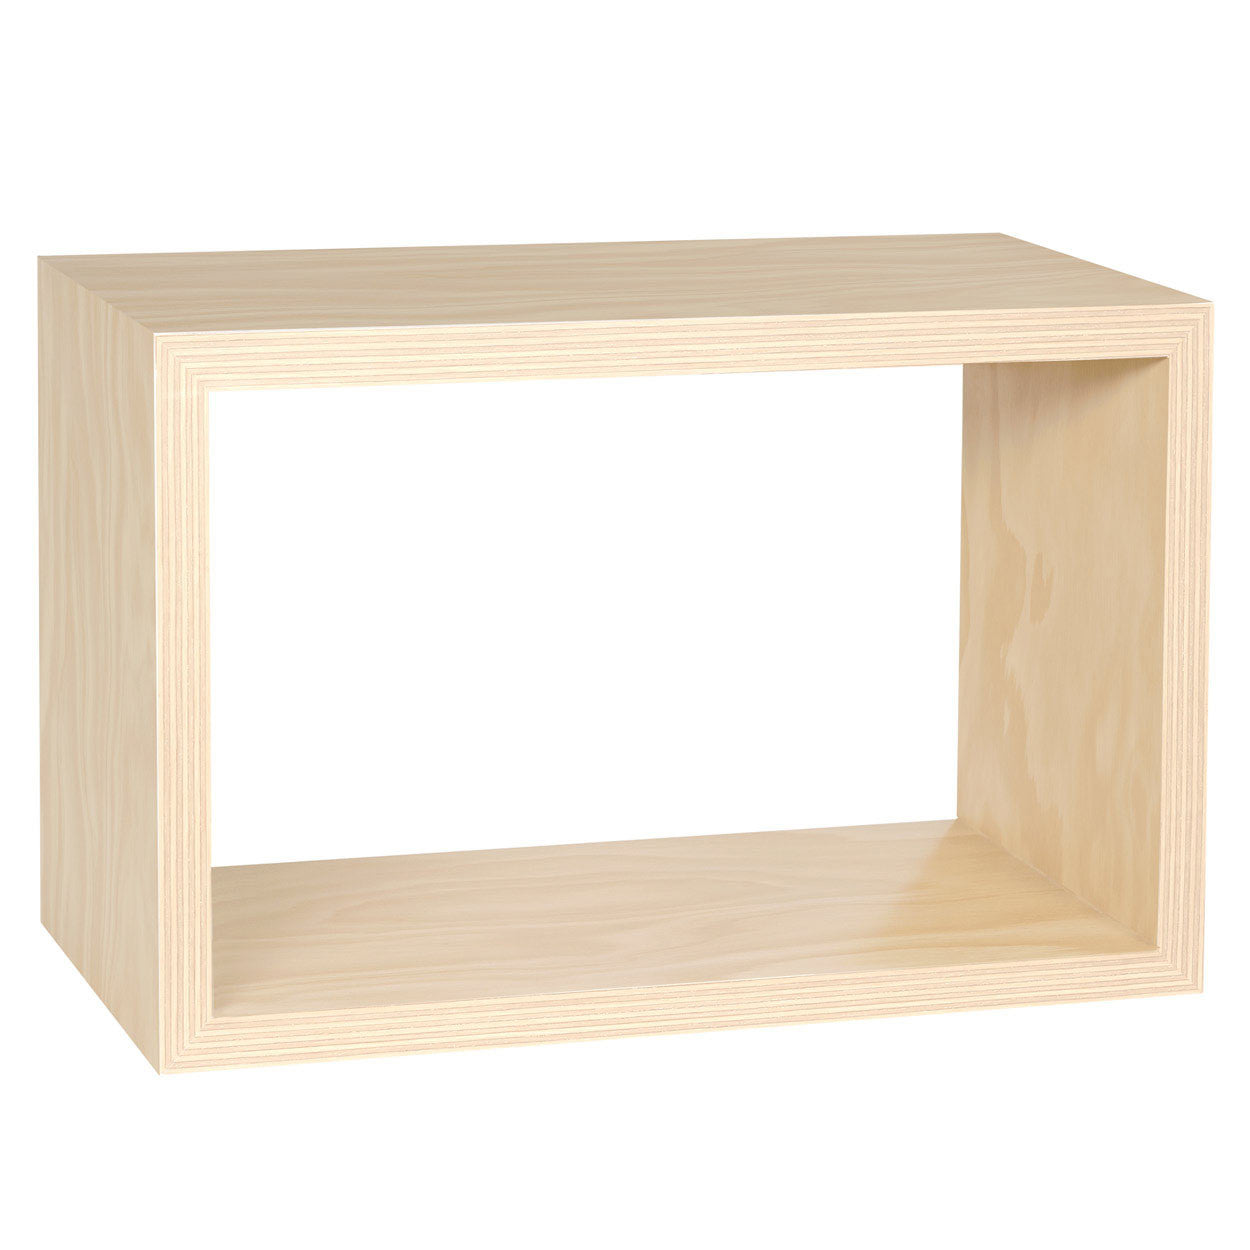 Hanging Wooden Display Cube - 600mm Bay - Ply